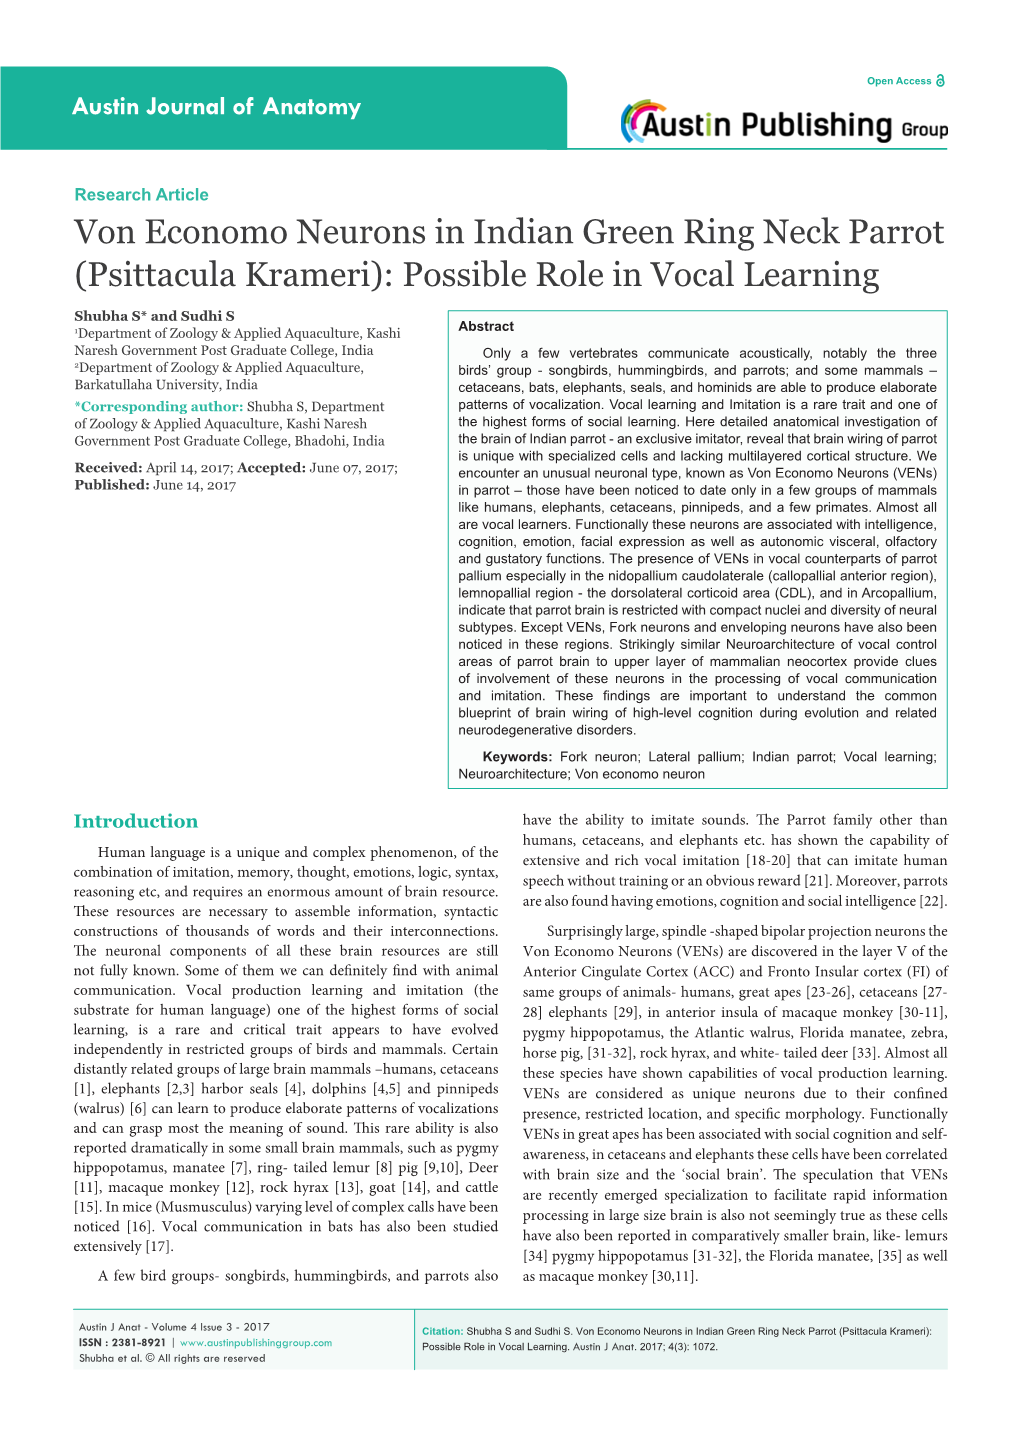 Von Economo Neurons in Indian Green Ring Neck Parrot (Psittacula Krameri): Possible Role in Vocal Learning